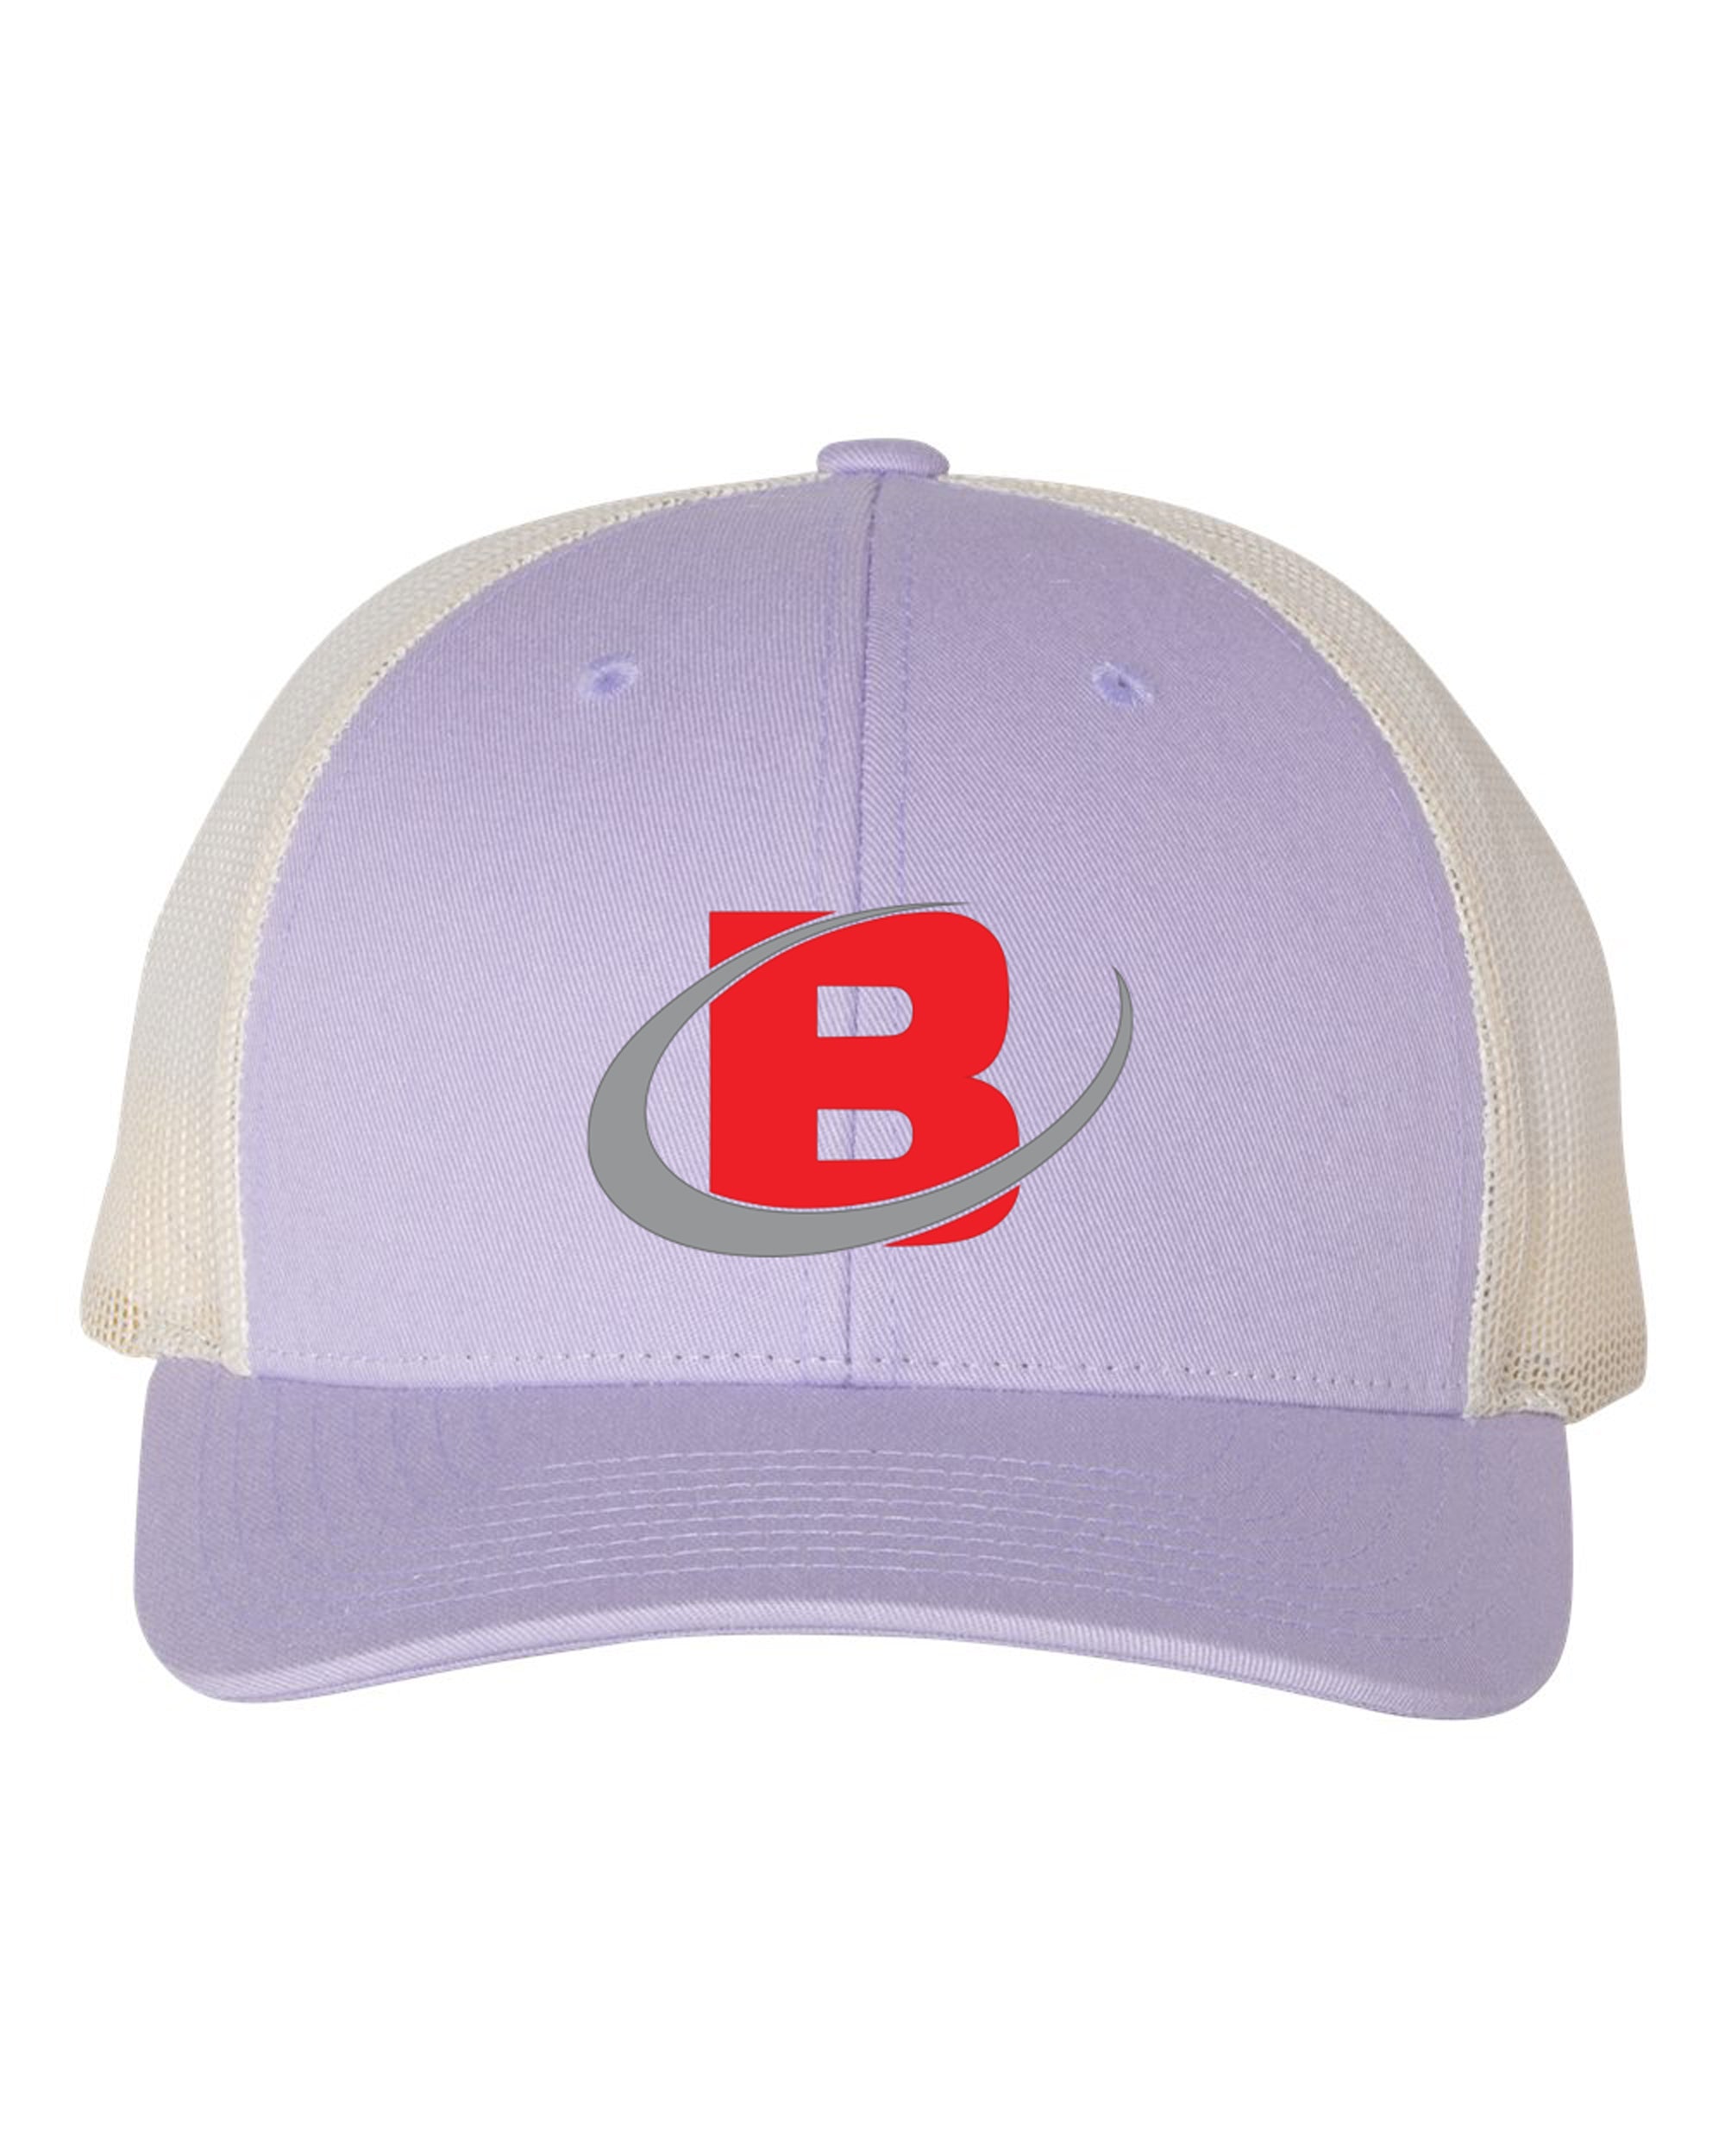 Bowman Excavating - Structured Hat